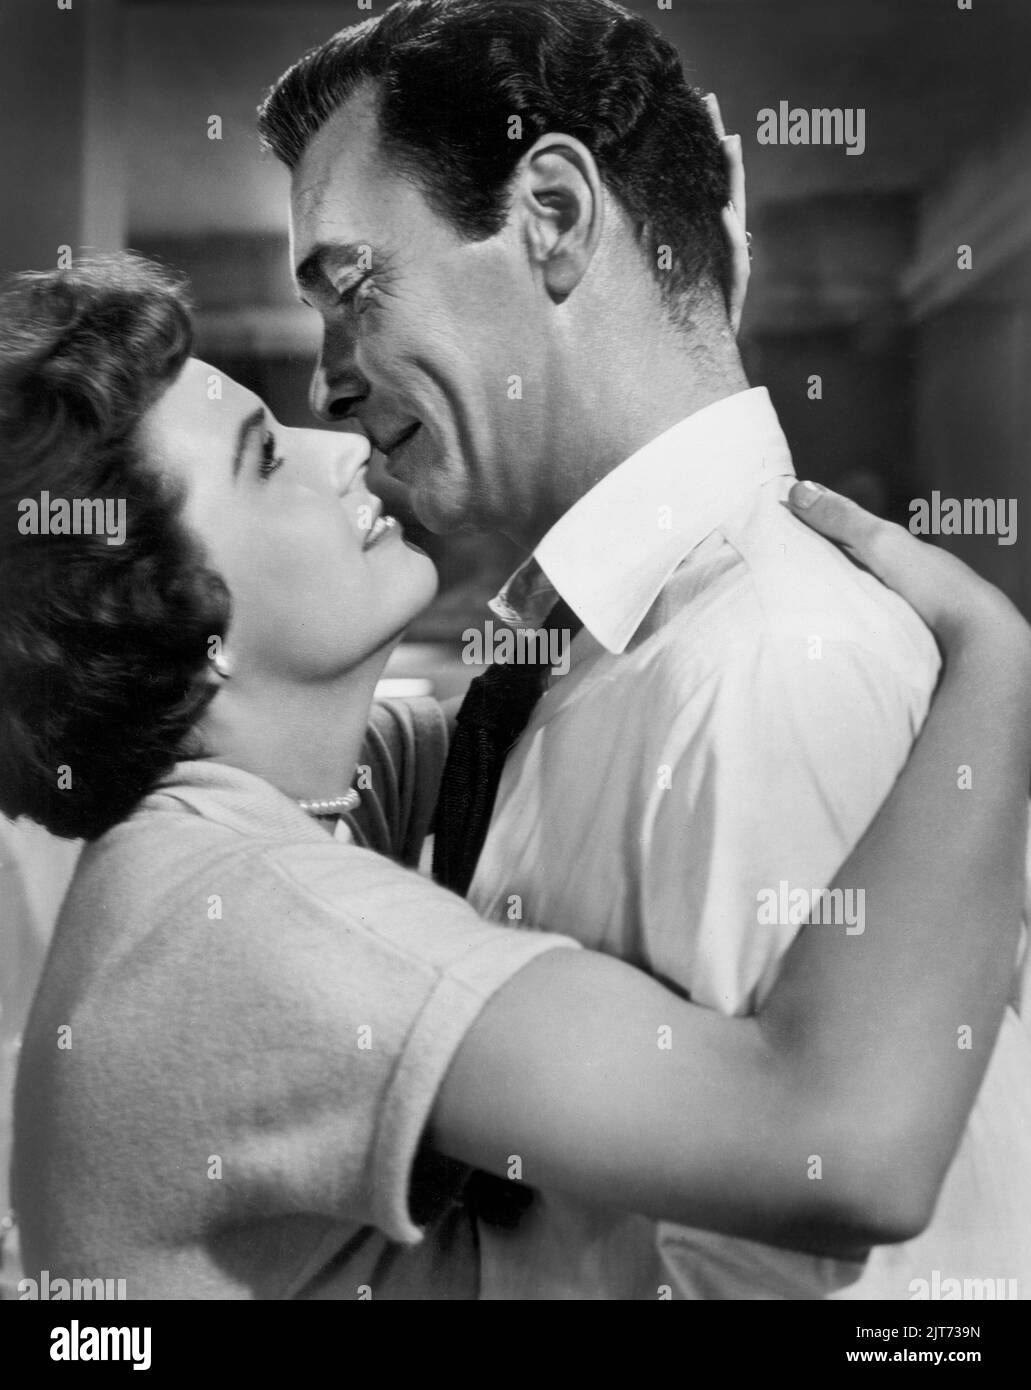 Polly Bergen, Barry Fitzgerald, on-set of the Film, 'Cry of the Hunted', MGM, Loew's Inc., 1953 Stock Photo